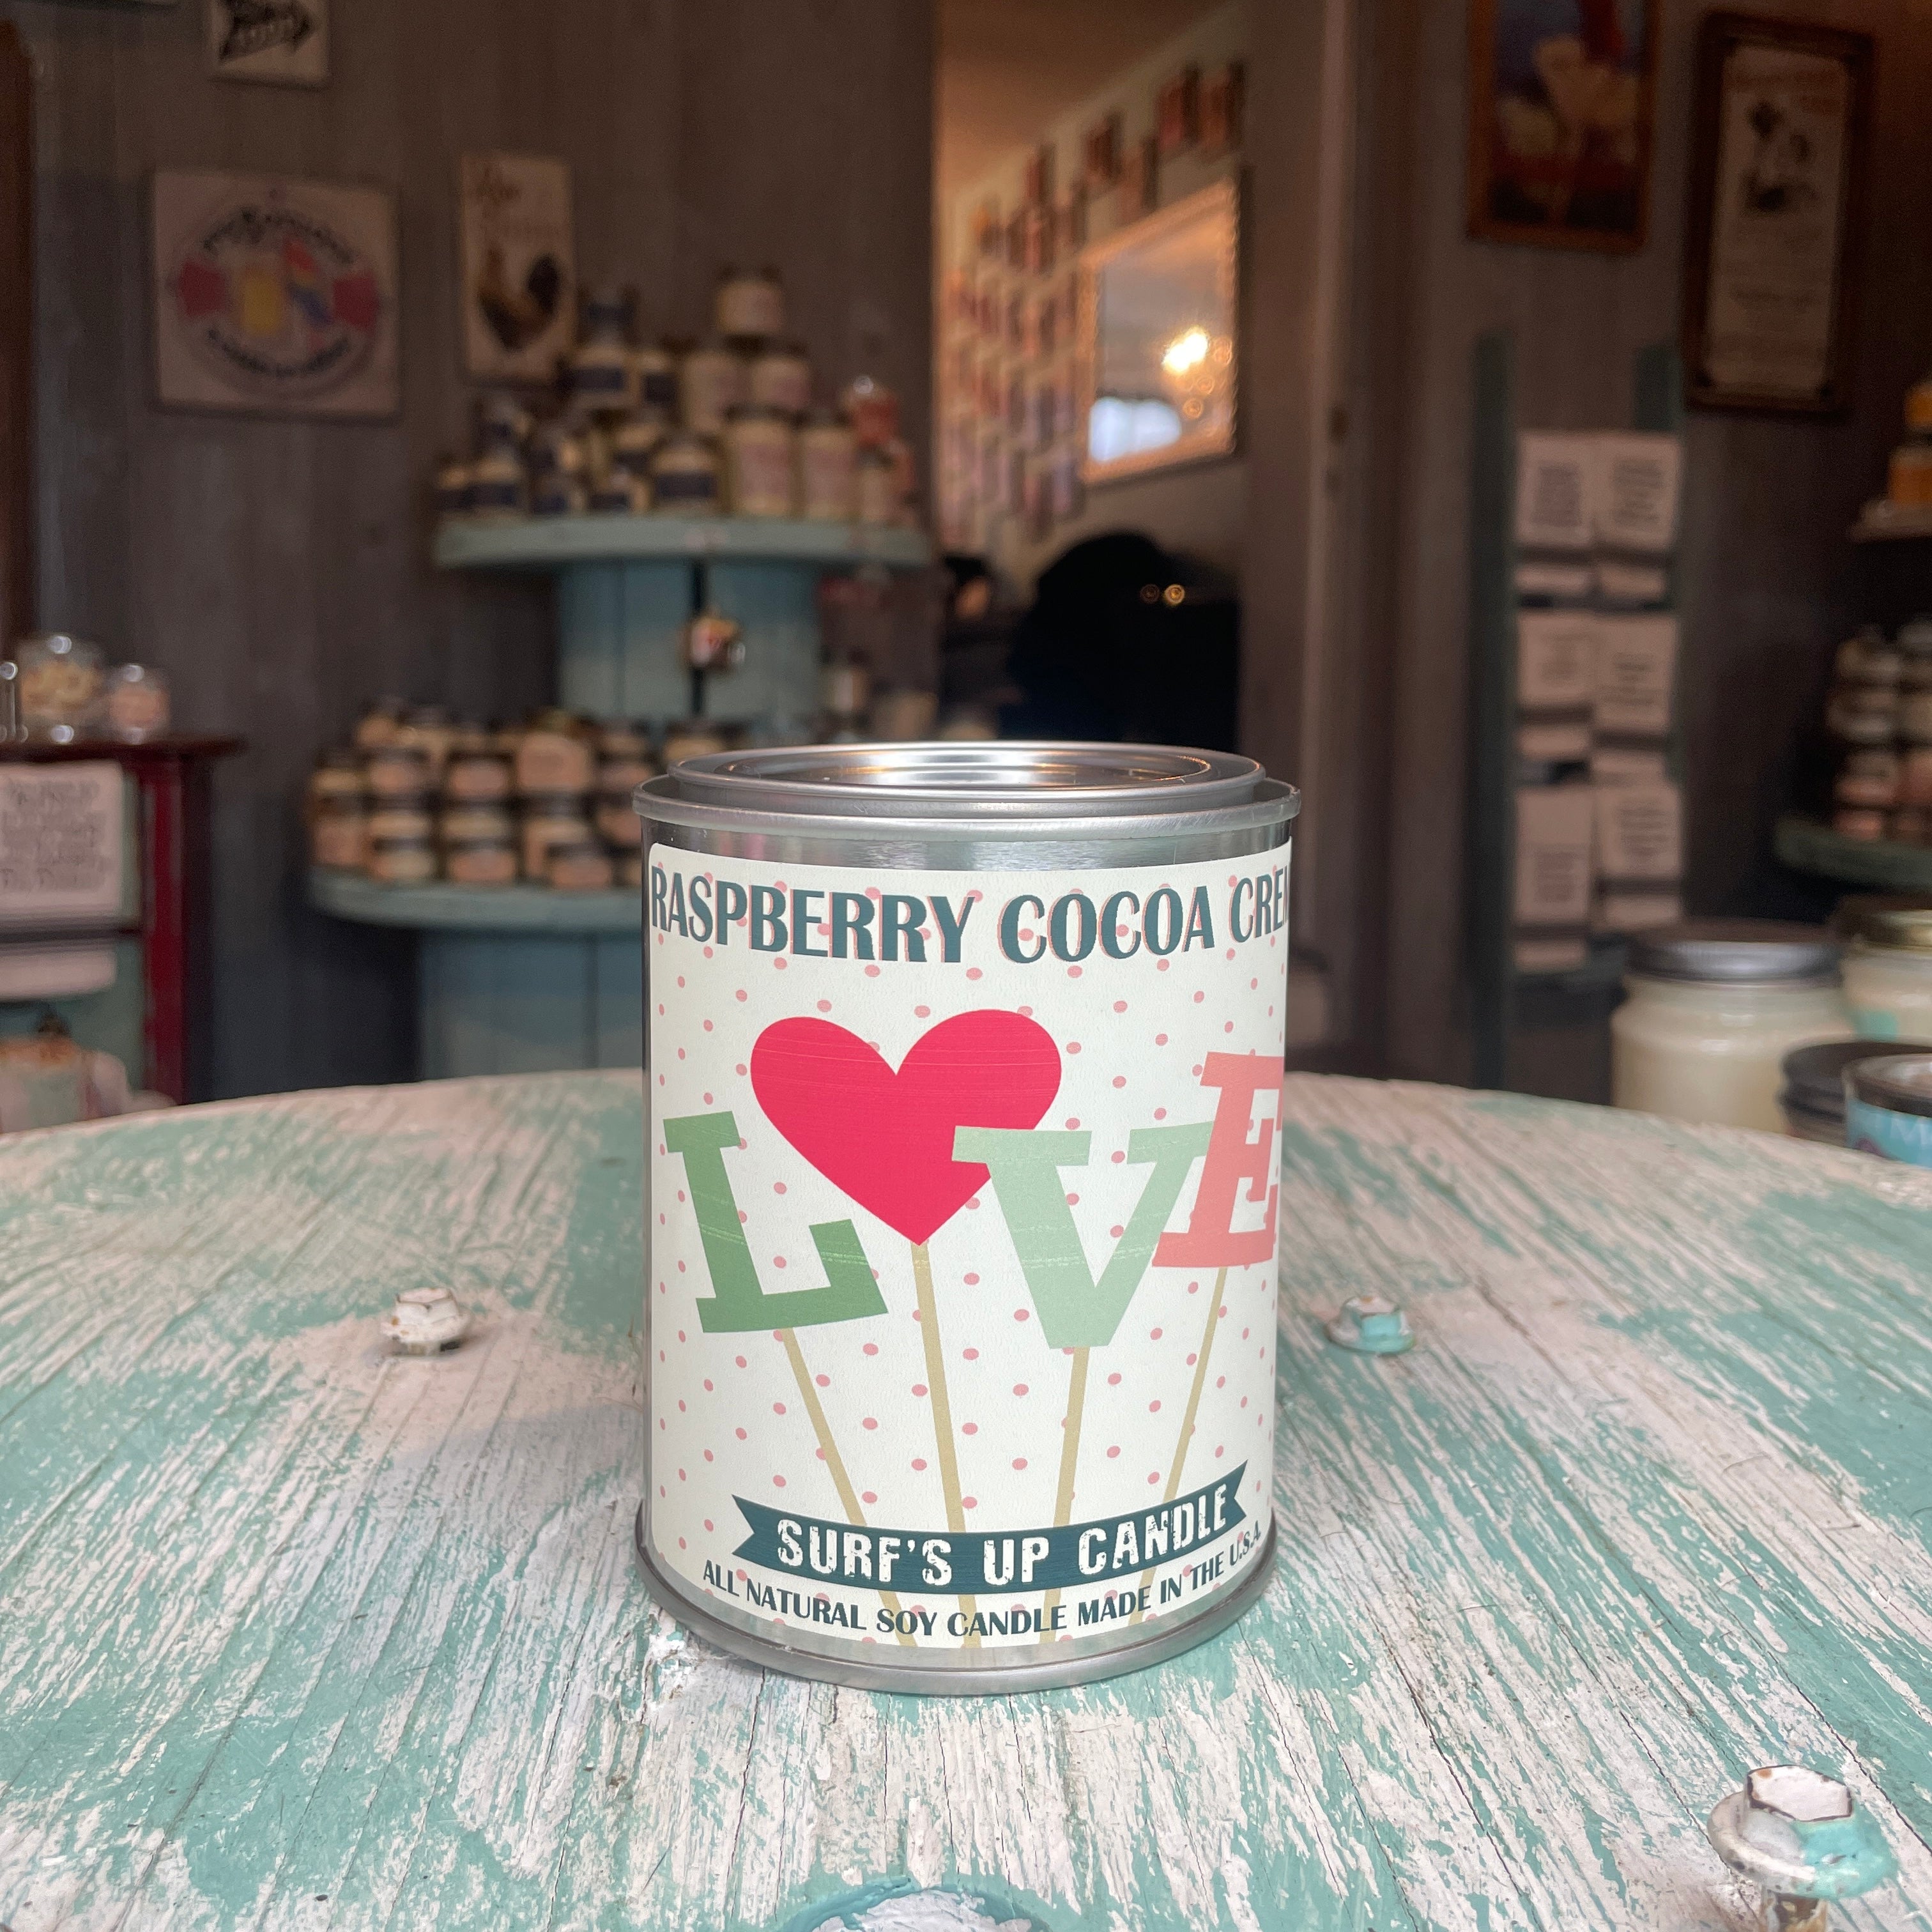 Sidewalk Sale 24 LOVE Raspberry Cocoa Creme Paint Can Candle - Valentine's Day Collection